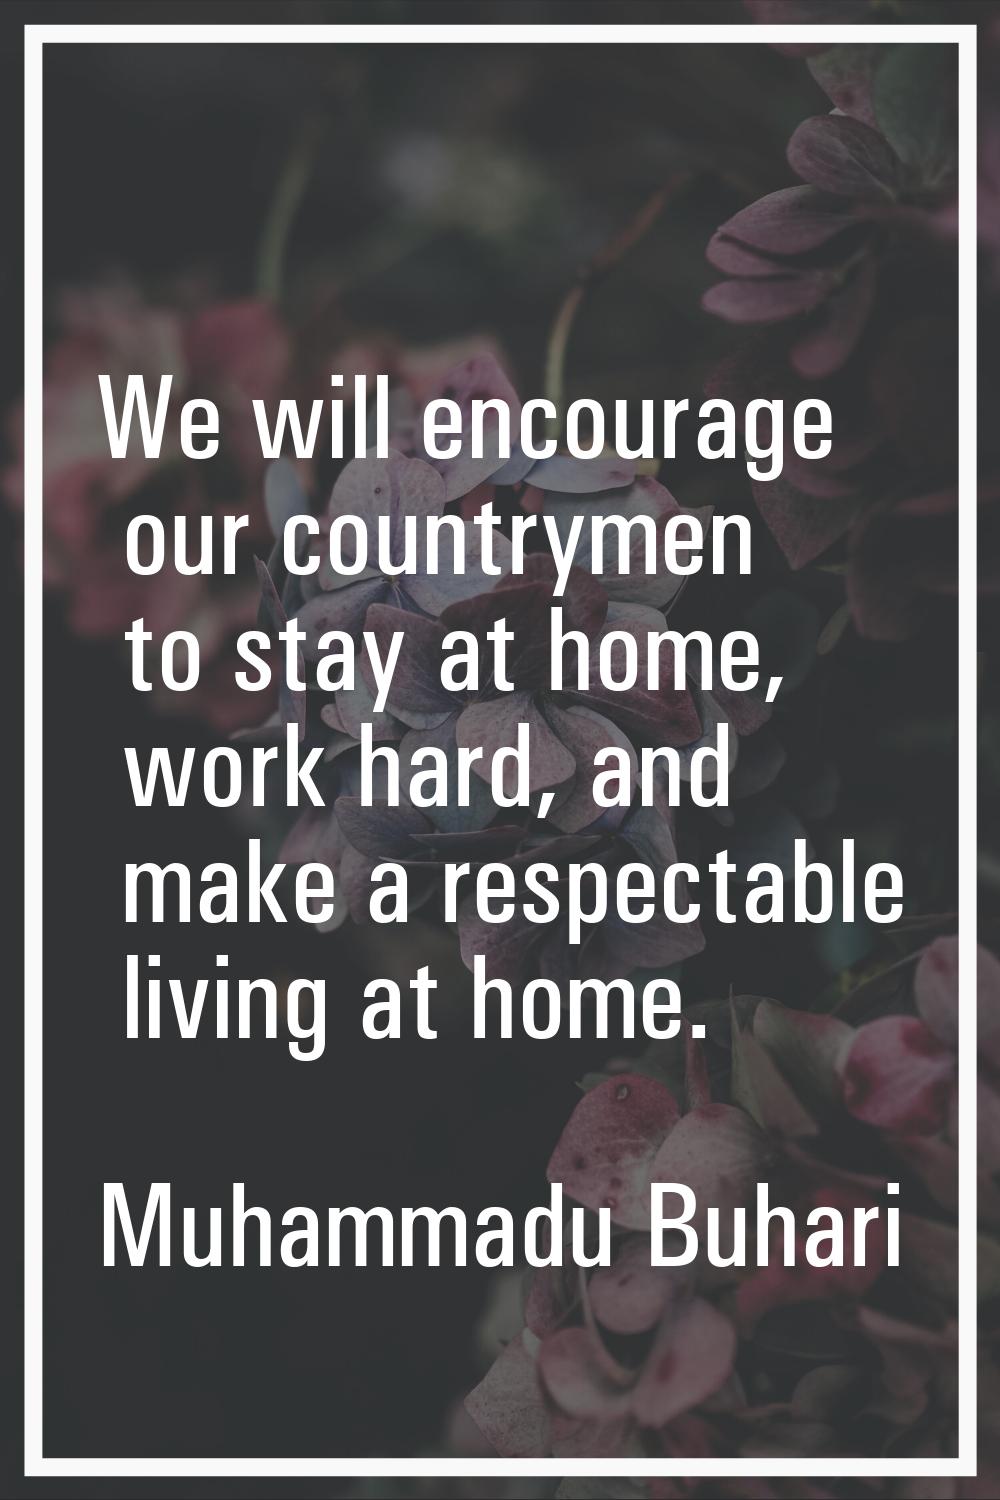 We will encourage our countrymen to stay at home, work hard, and make a respectable living at home.